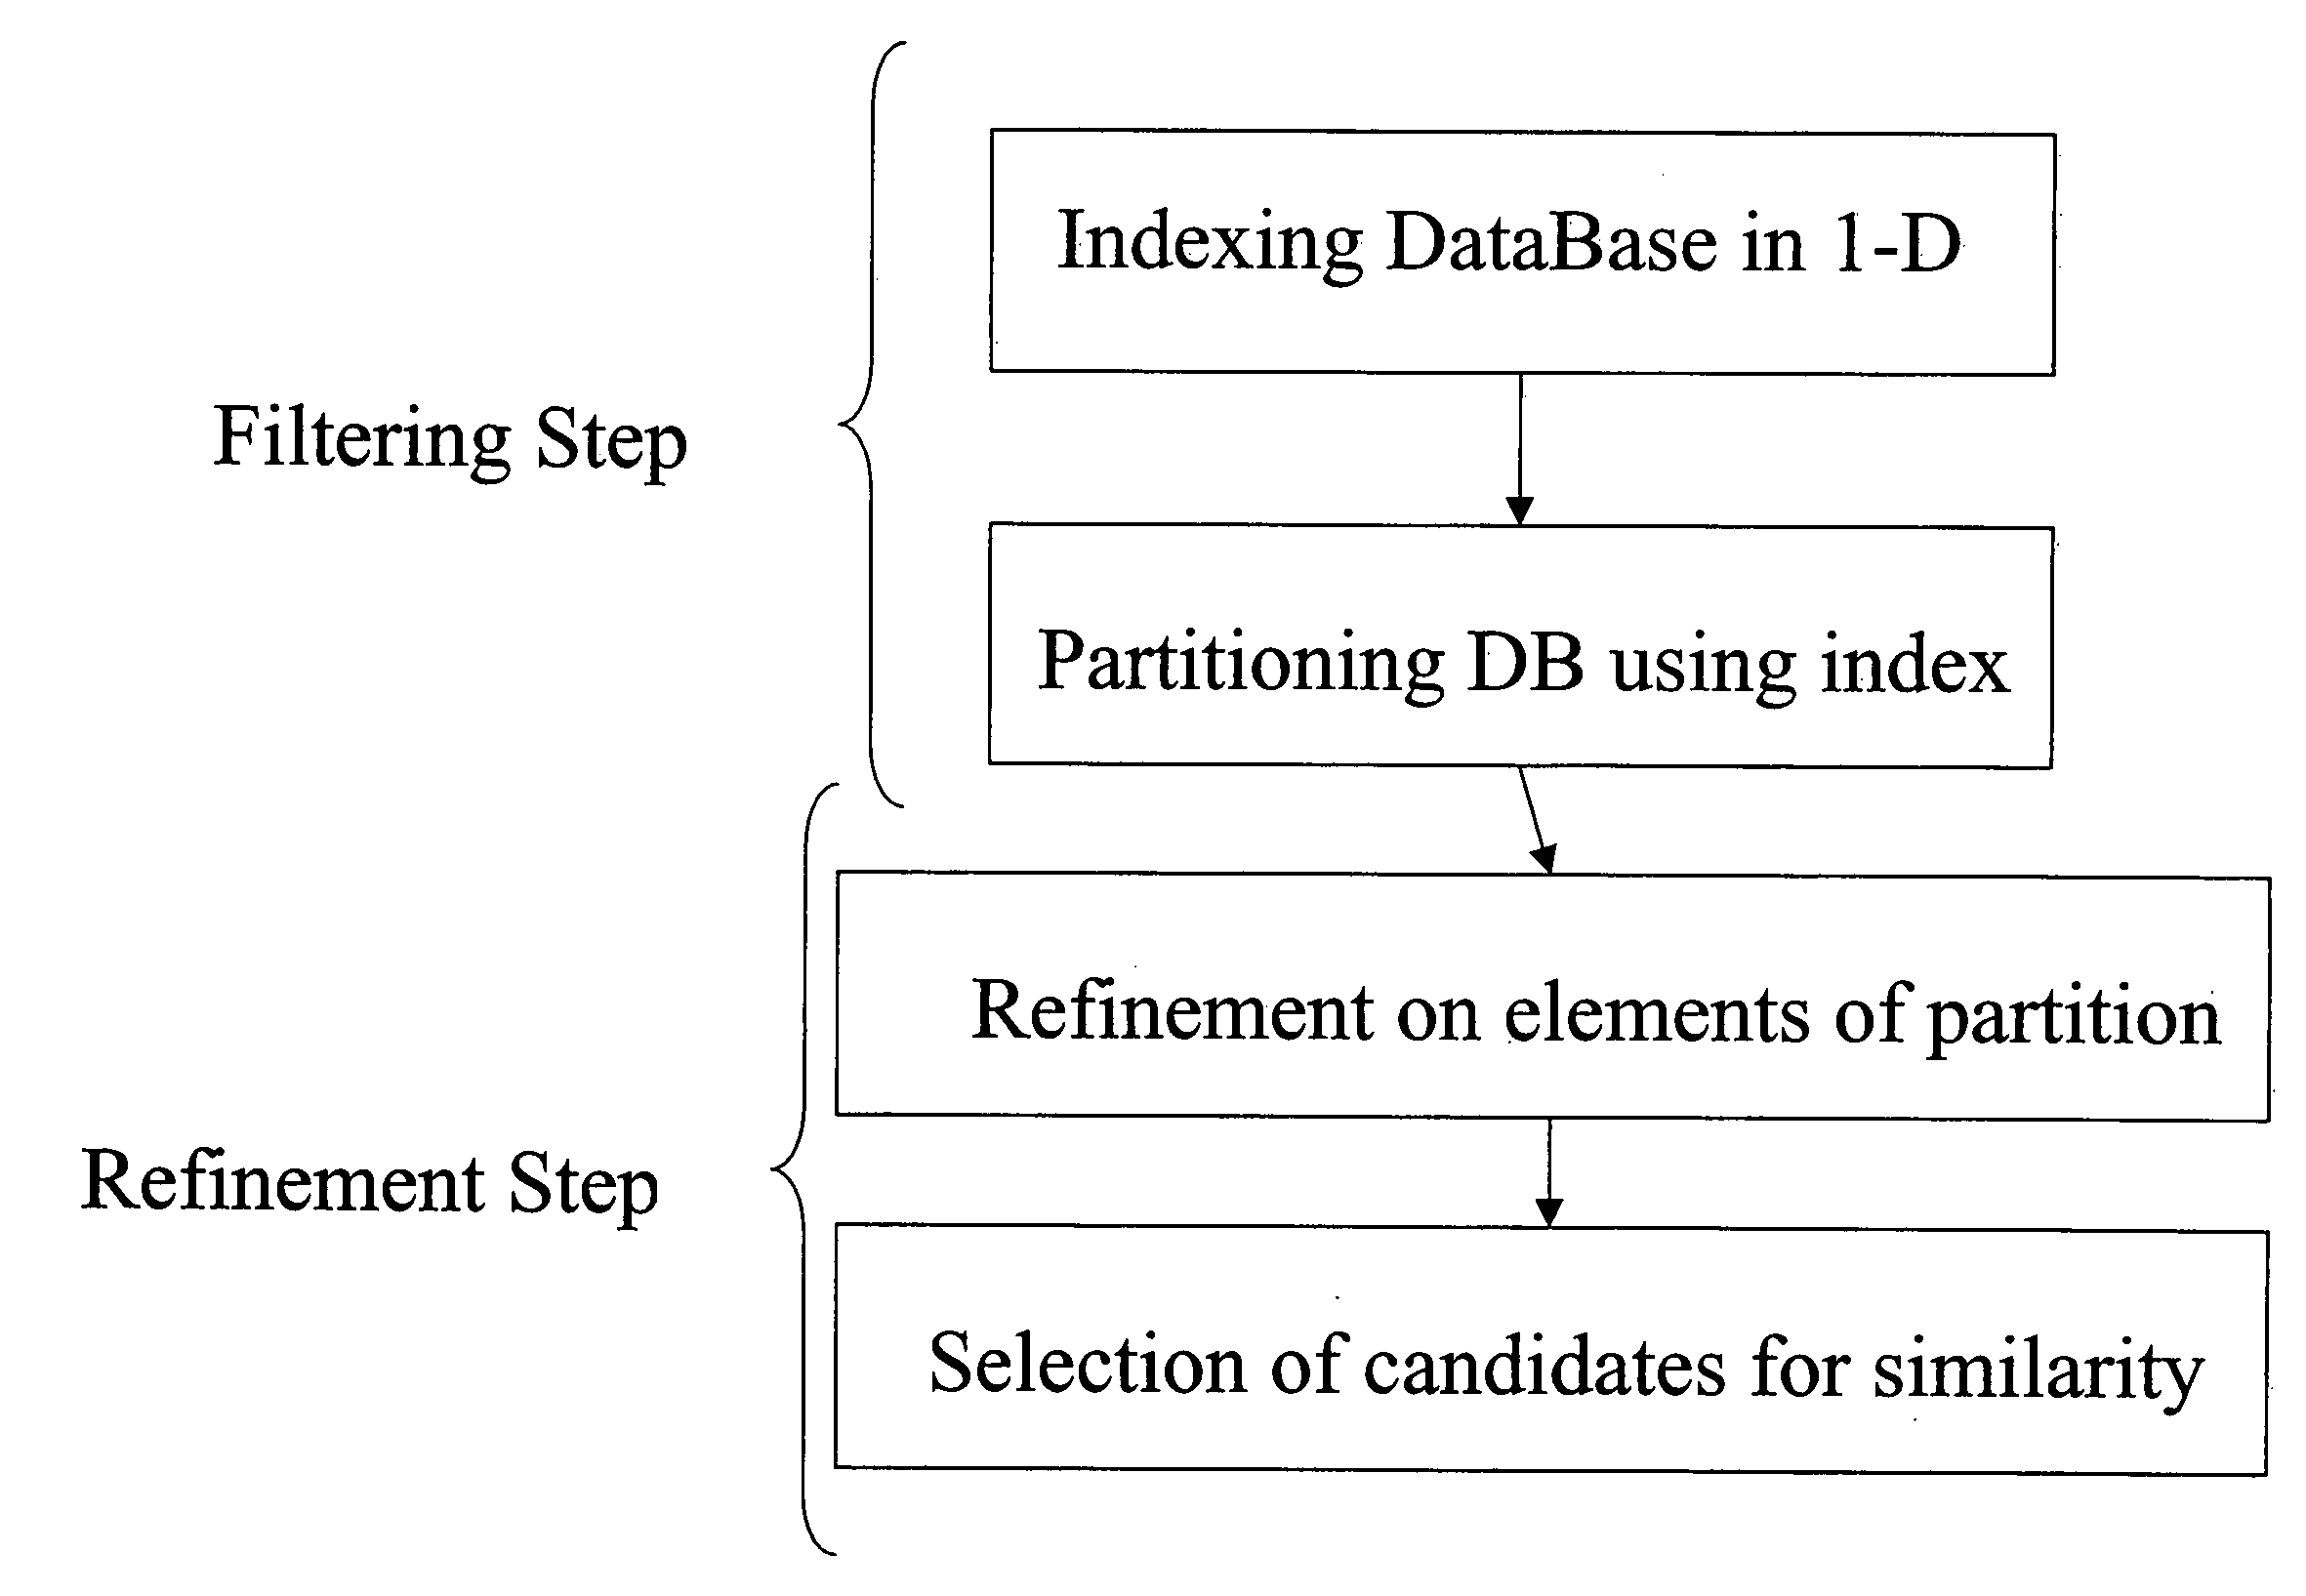 Search of similar features representing objects in a large reference database